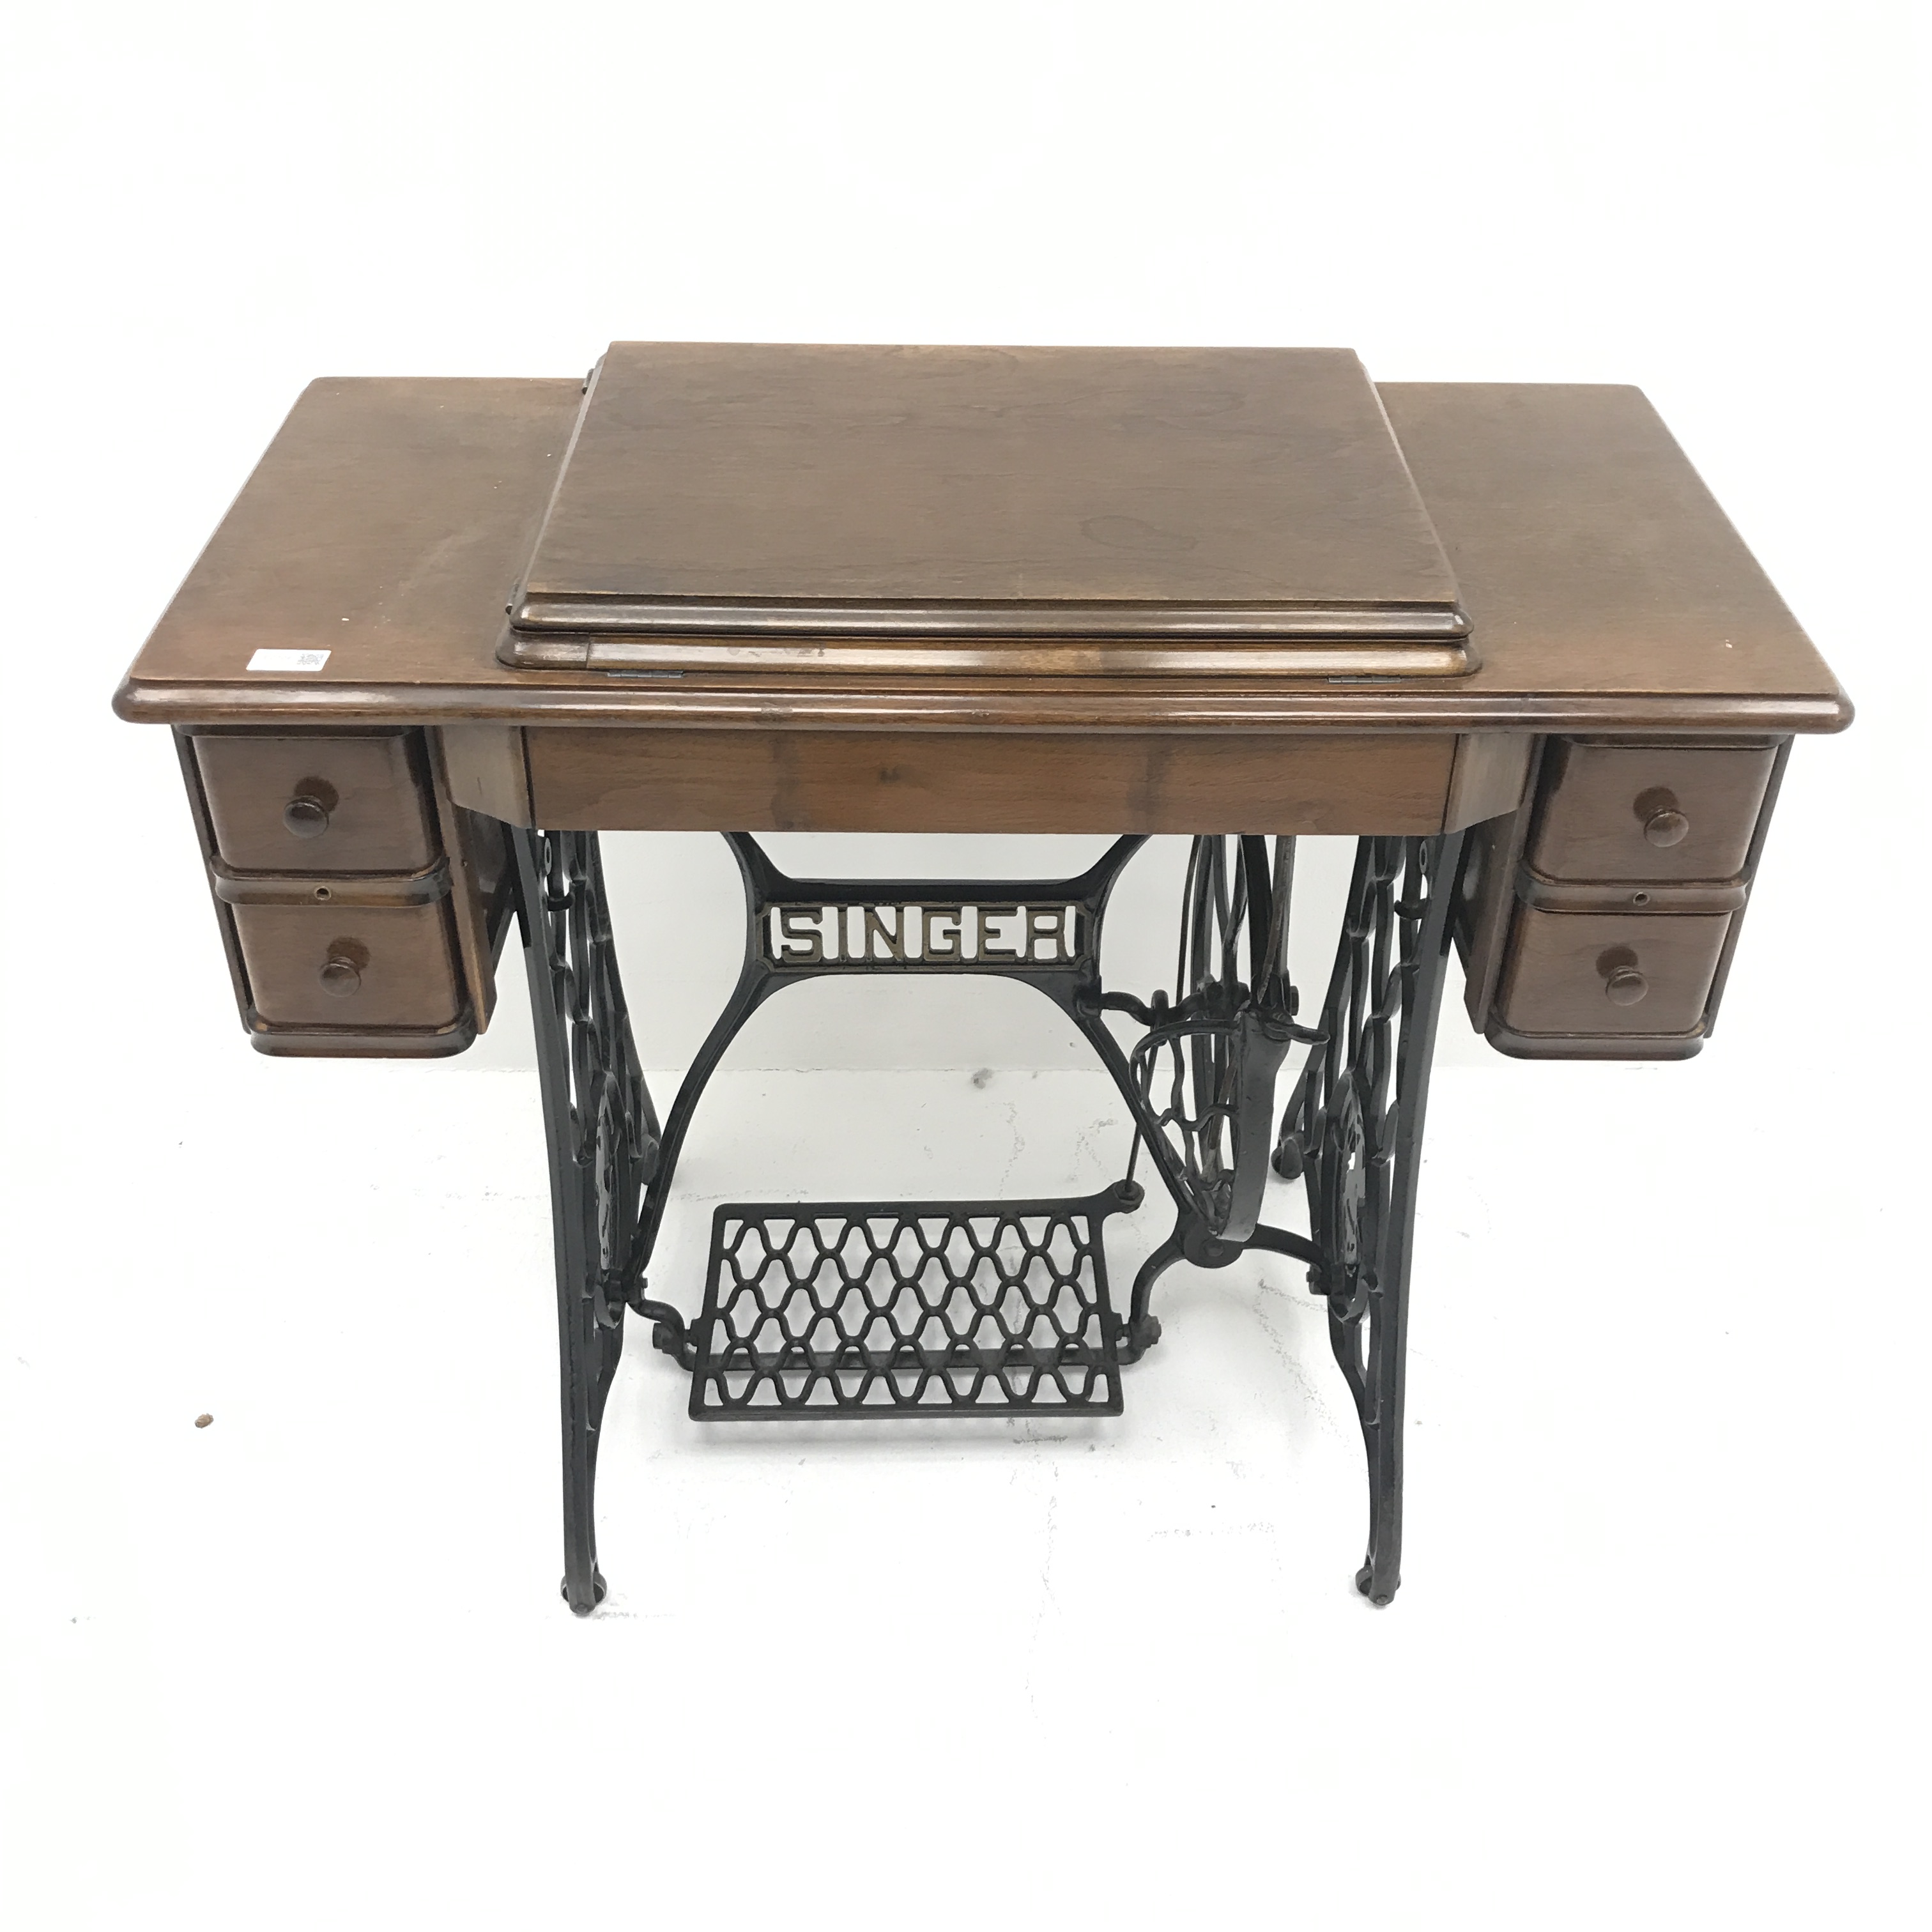 Singer Treadle sewing machine, four drawers, wrought iron base, W91cm, H77cm, D44cm - Image 7 of 10